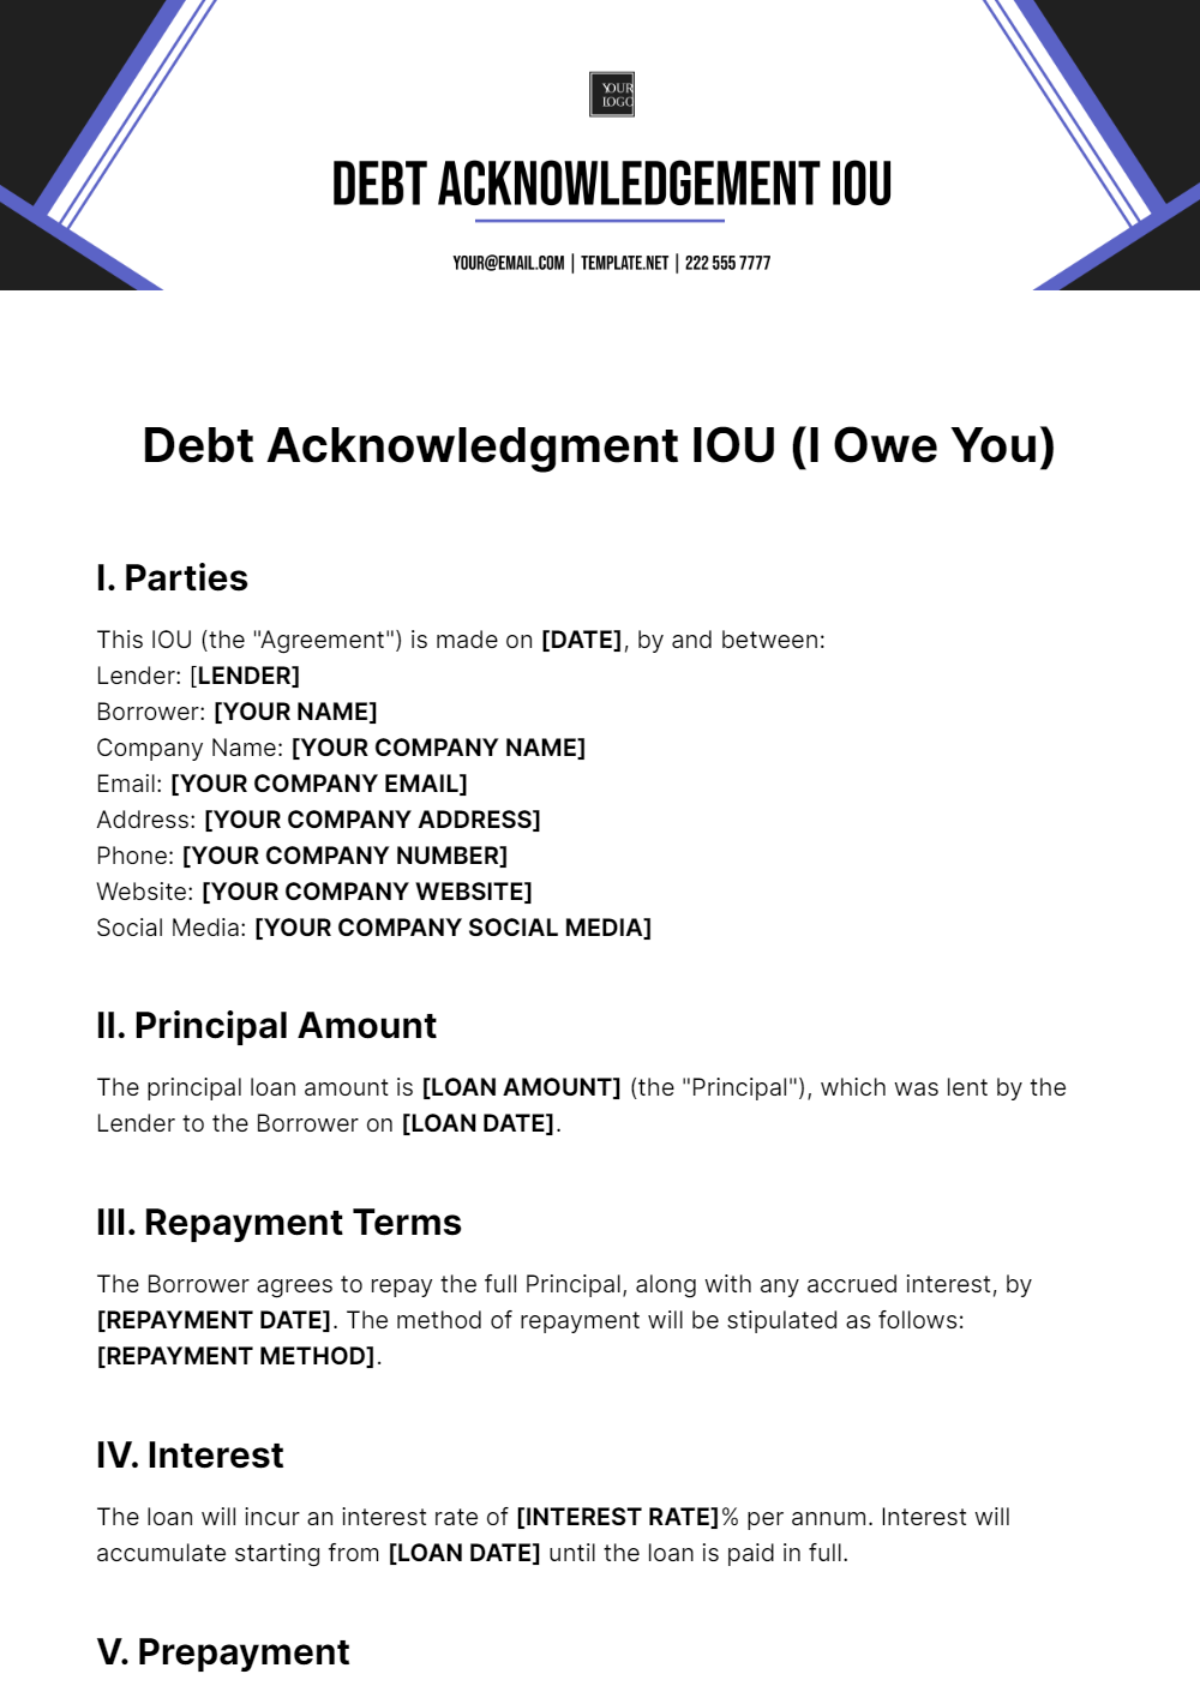 Free Debt Acknowledgment IOU Template